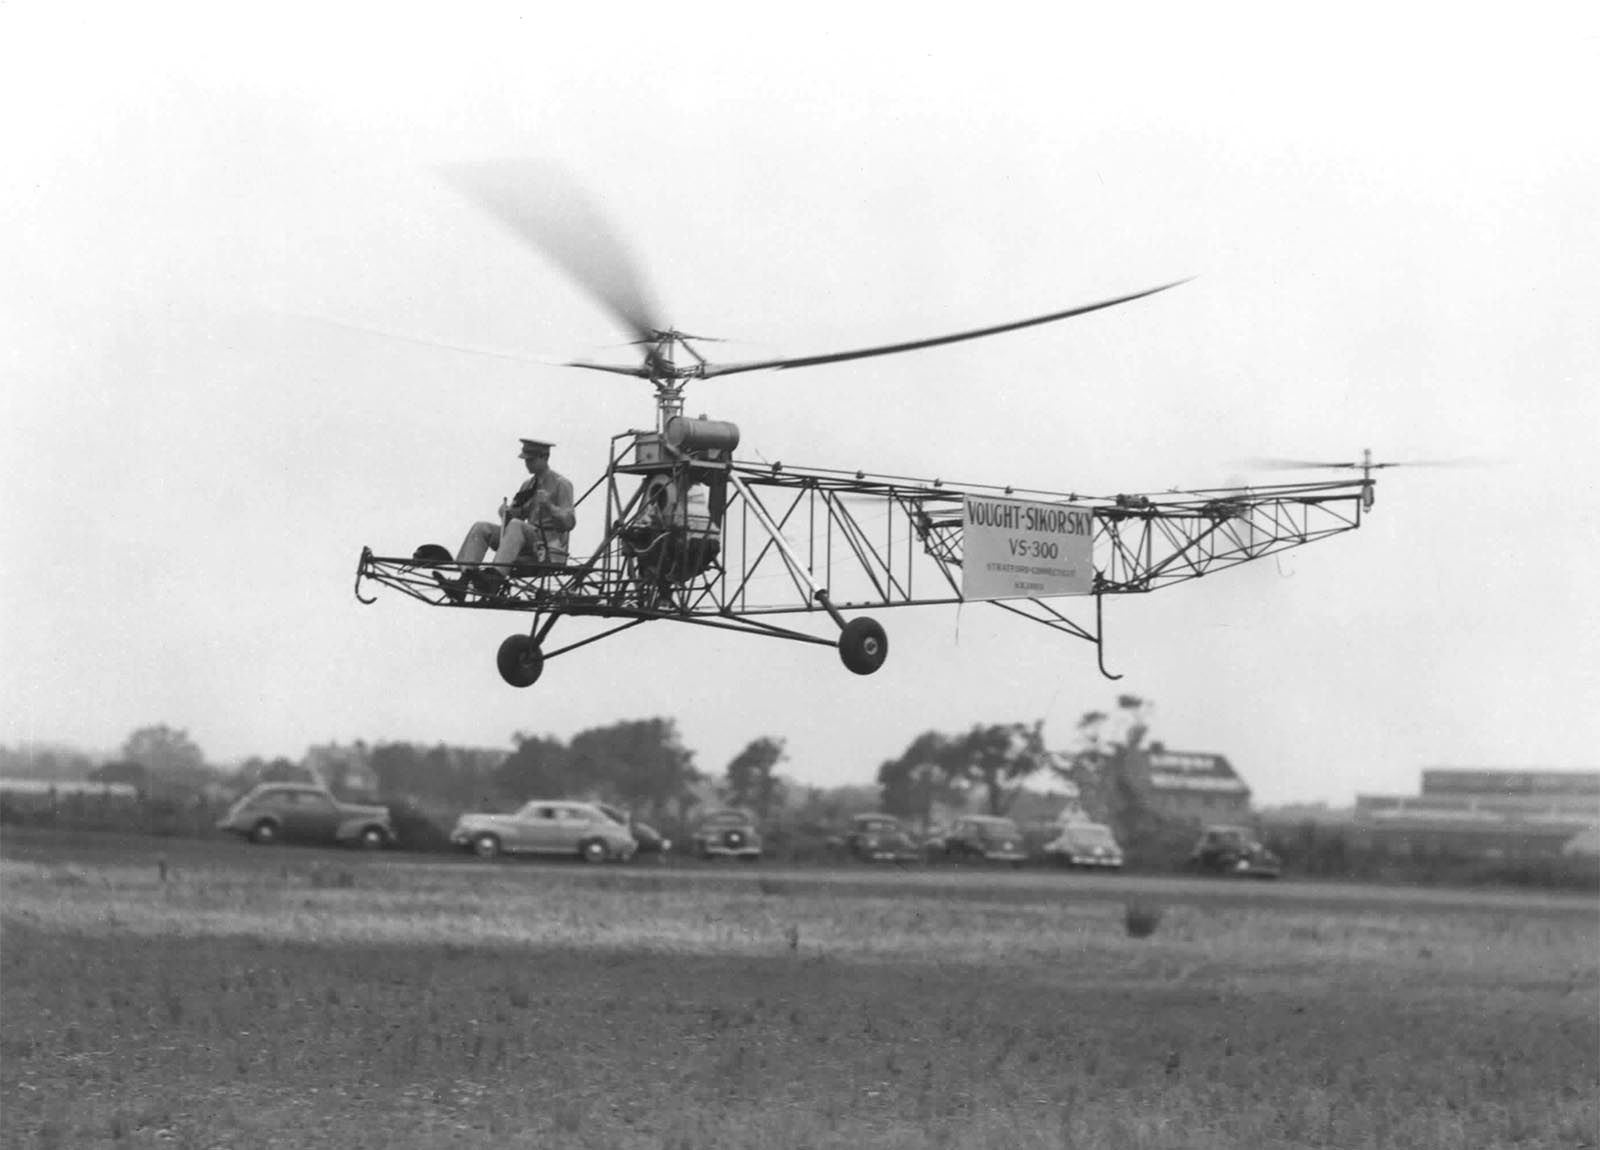 Captain H. Franklin Gregory at the controls of the VS-300.